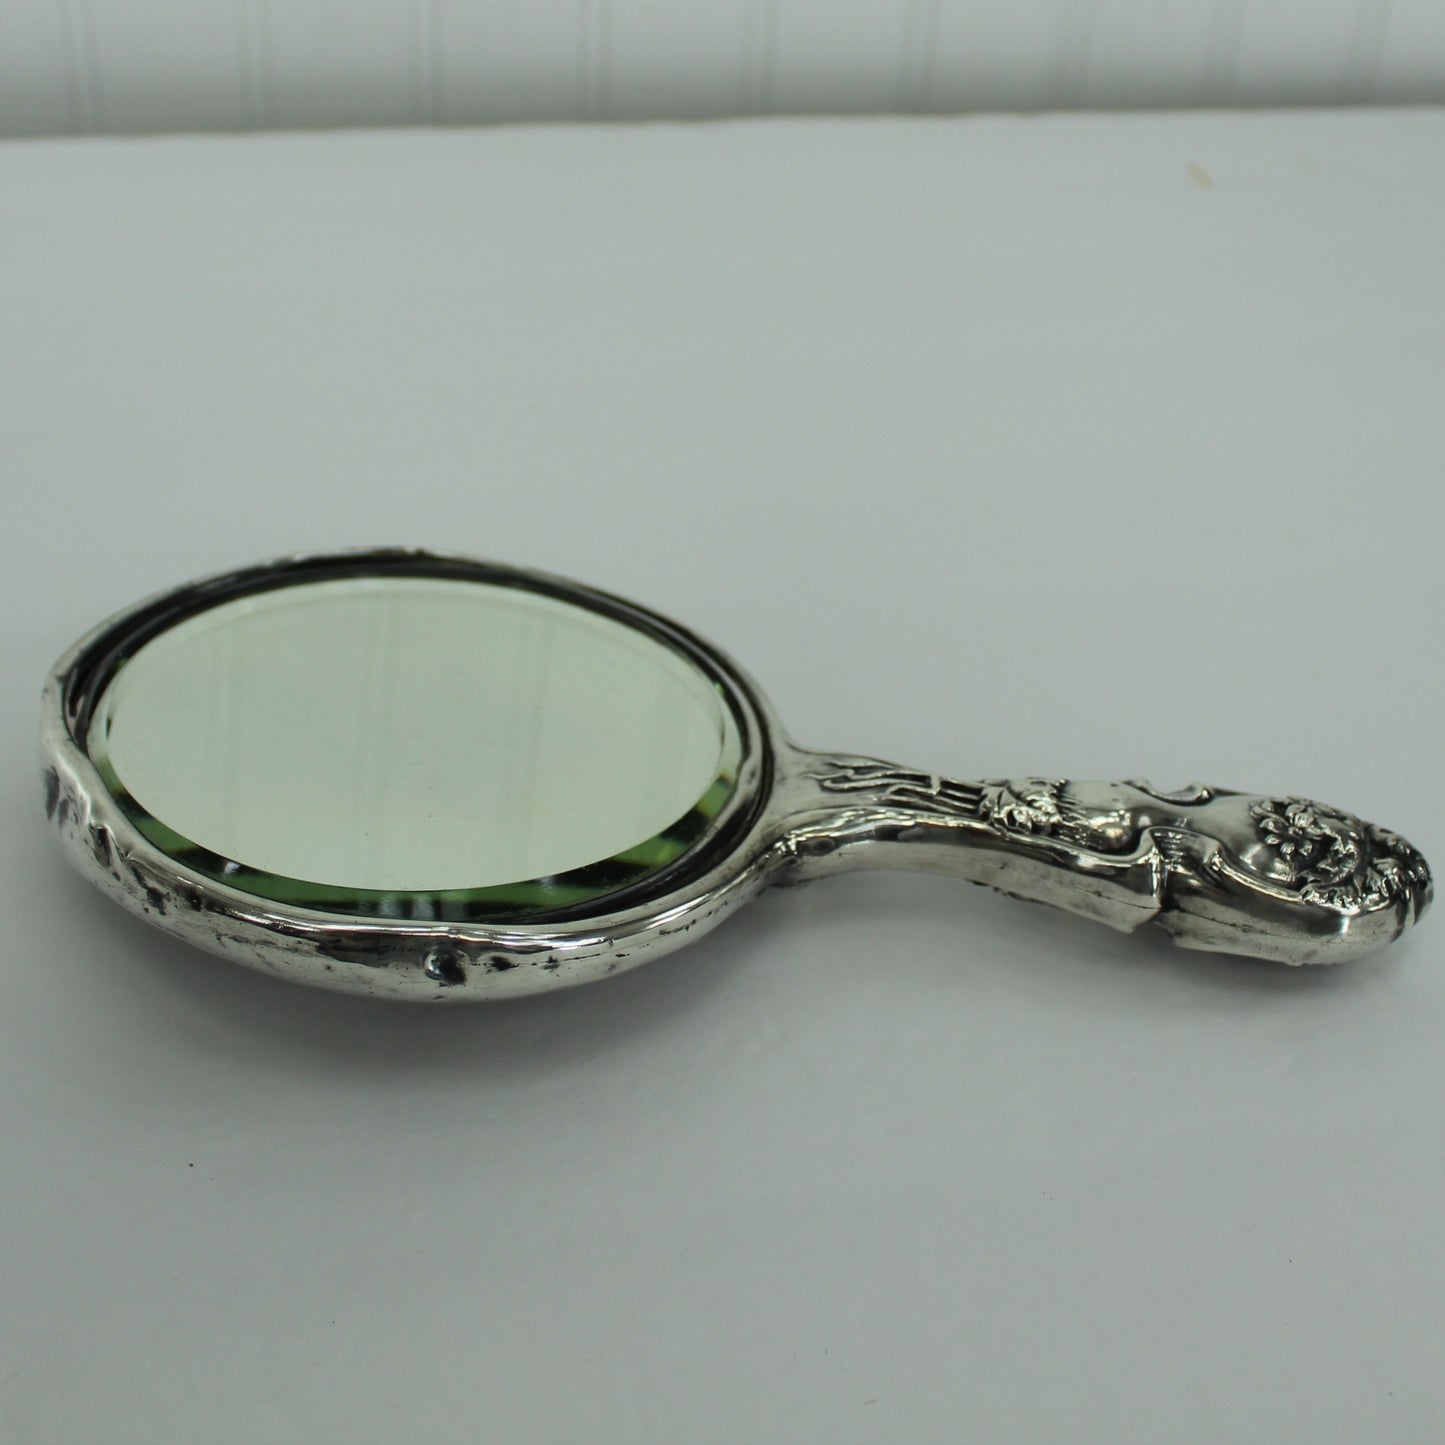 Antique Sterling Silver Hand Mirror Victorian Vanity Floral Art Nouveau Repousse lenthwise view of mirror and handle design